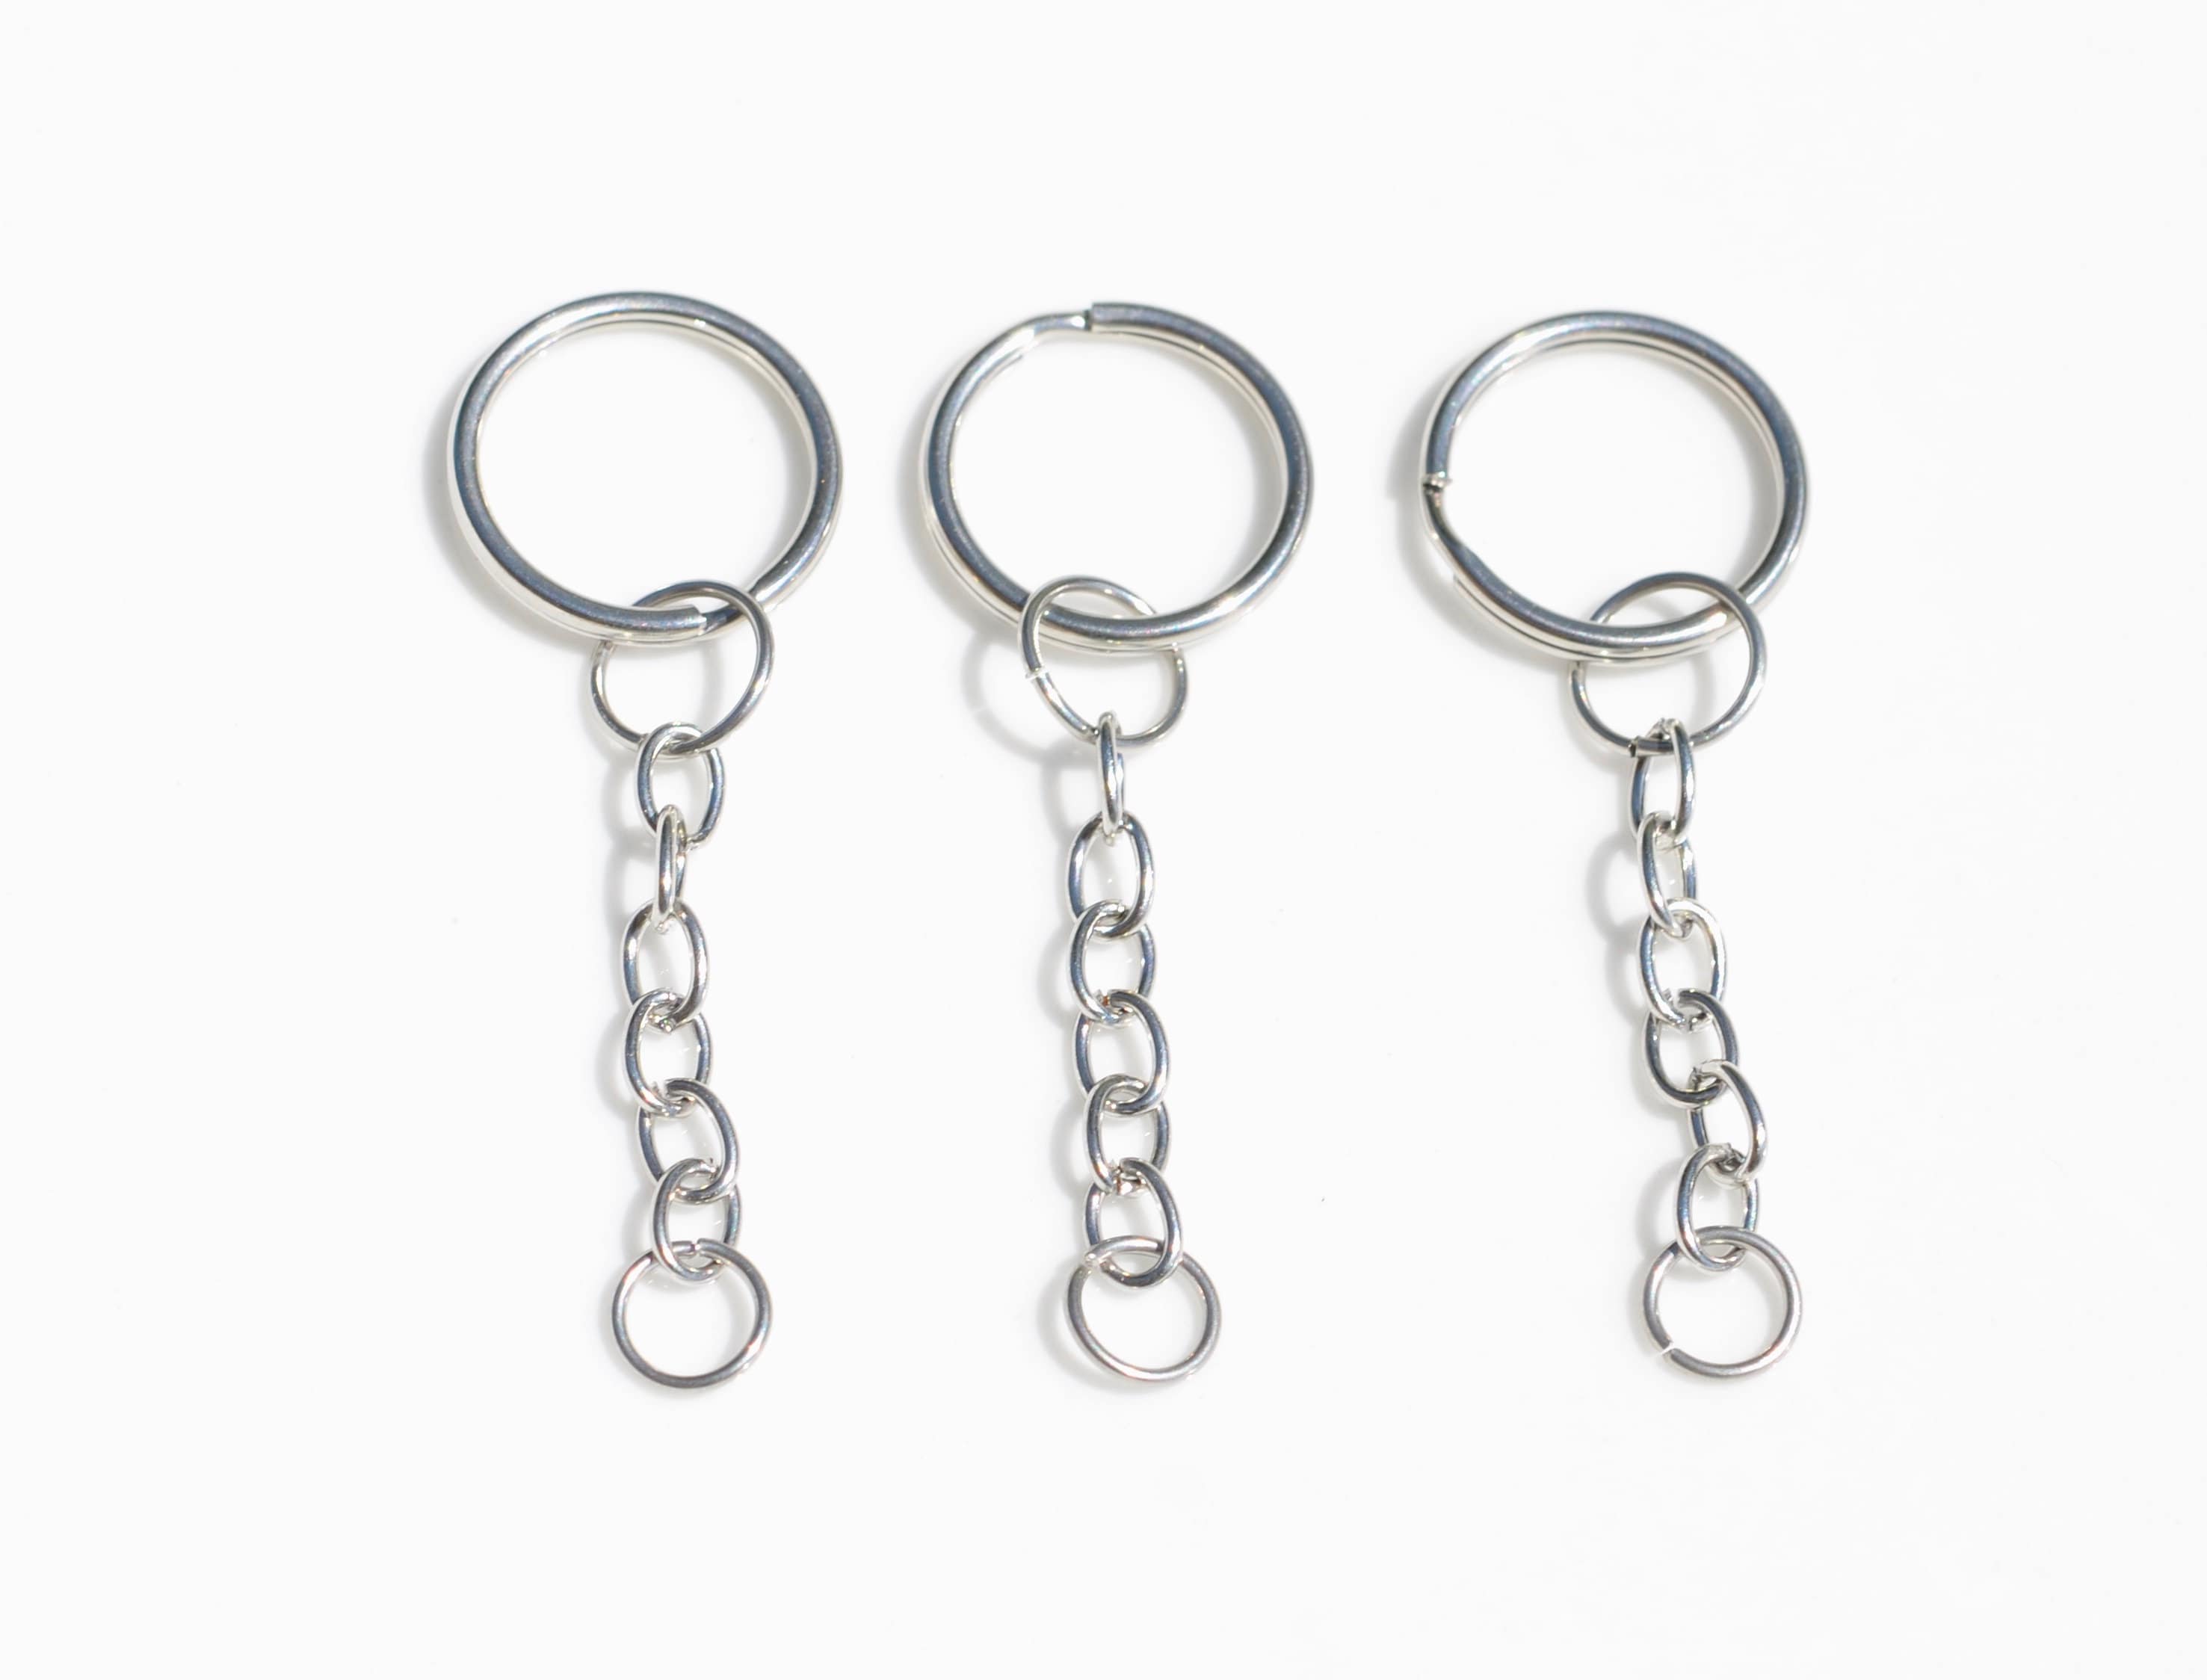 LSLeatherSupply Keyring with Chain Link Polished Stainless Steel, Key Chain, Key Fob Hardware DIY Keychain Supplies, Flat Split Ring